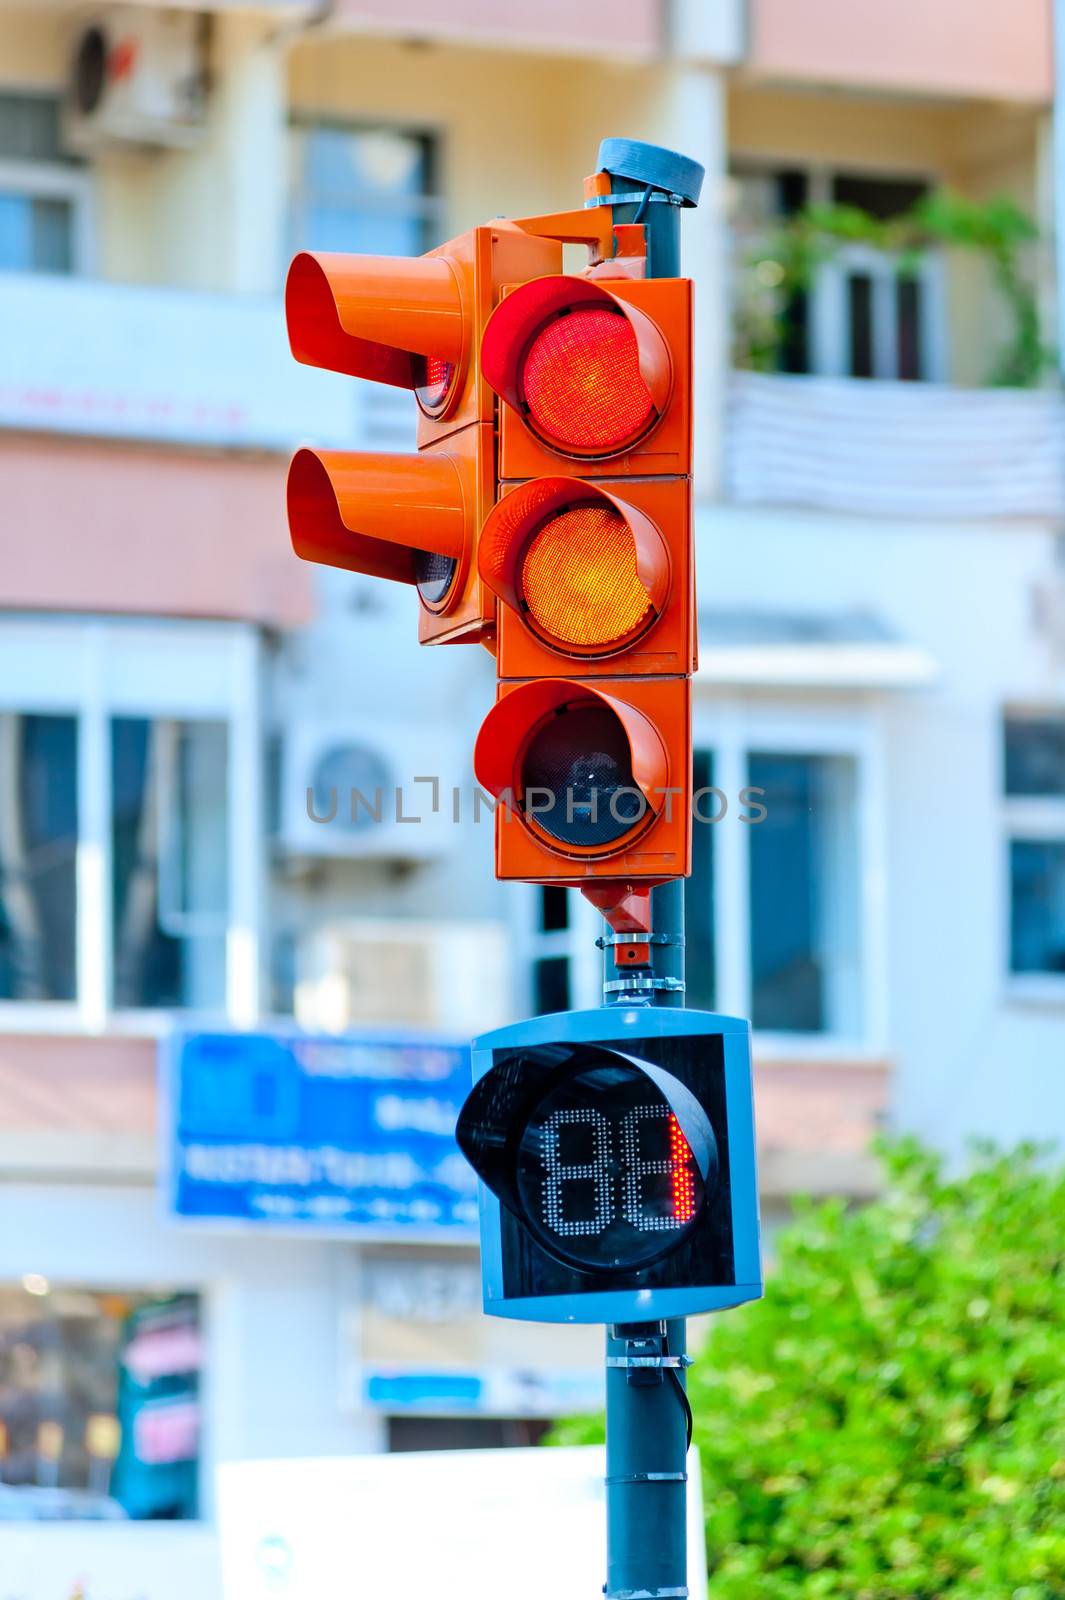 traffic light on the background of a city street by kosmsos111